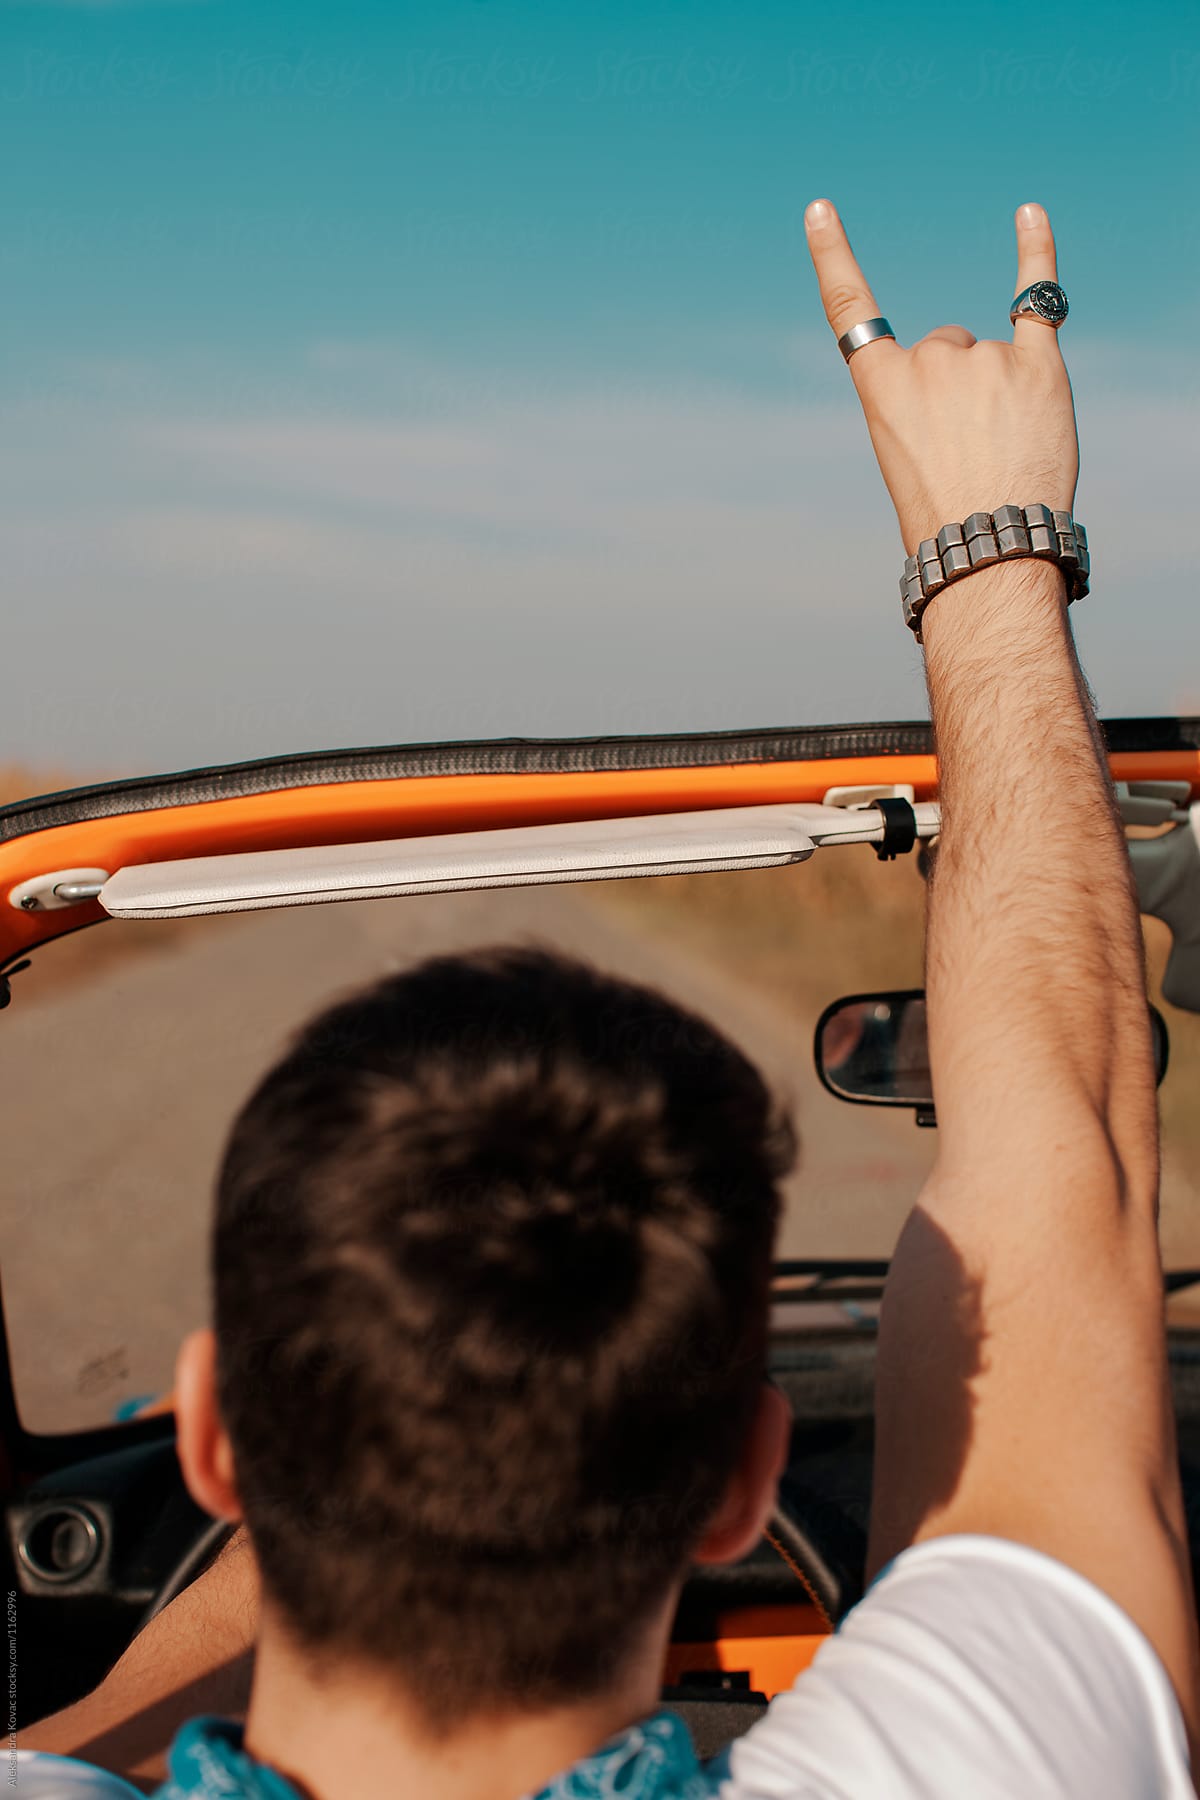 Man in convertible car shows a rock and roll hand sign